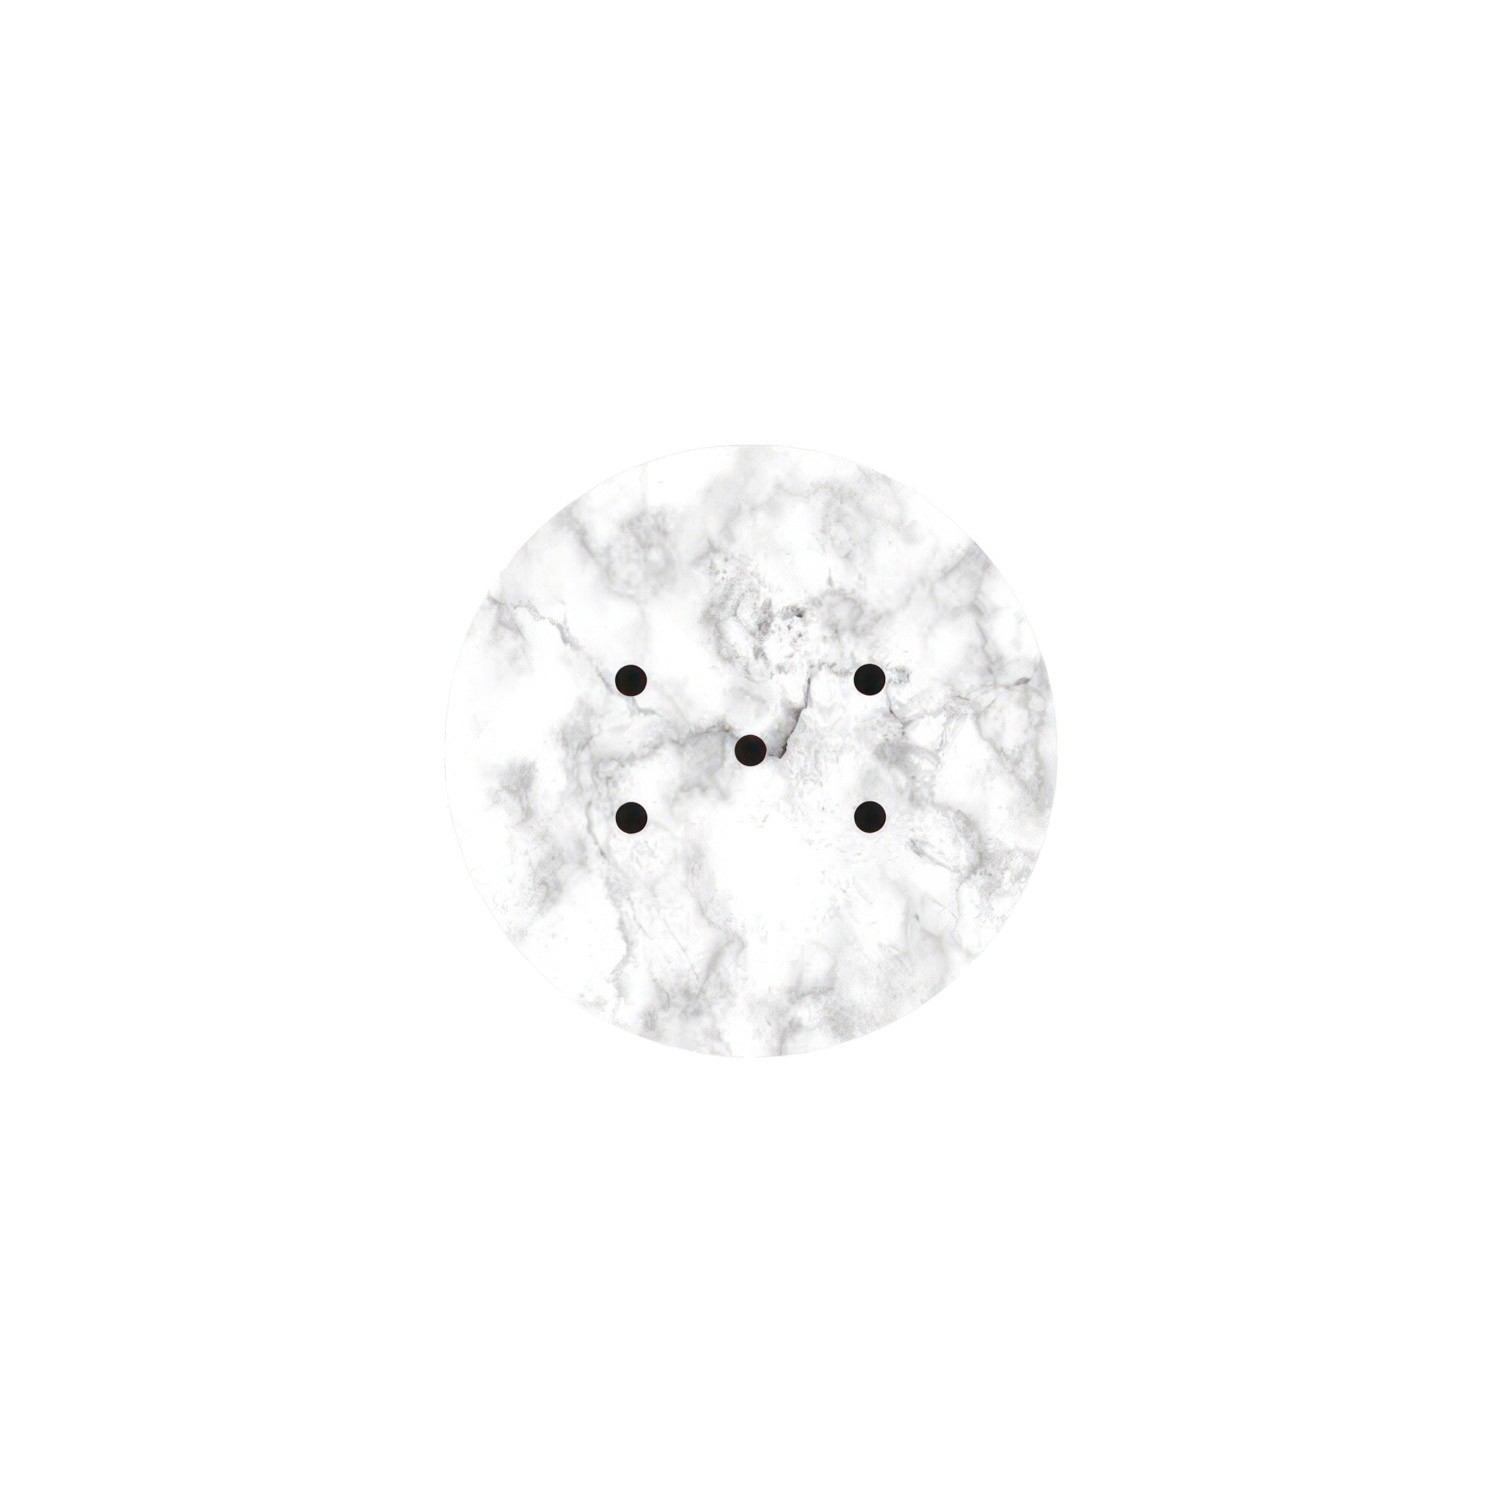 Round Rose-One 5-hole and 4 side holes ceiling rose, 200 mm